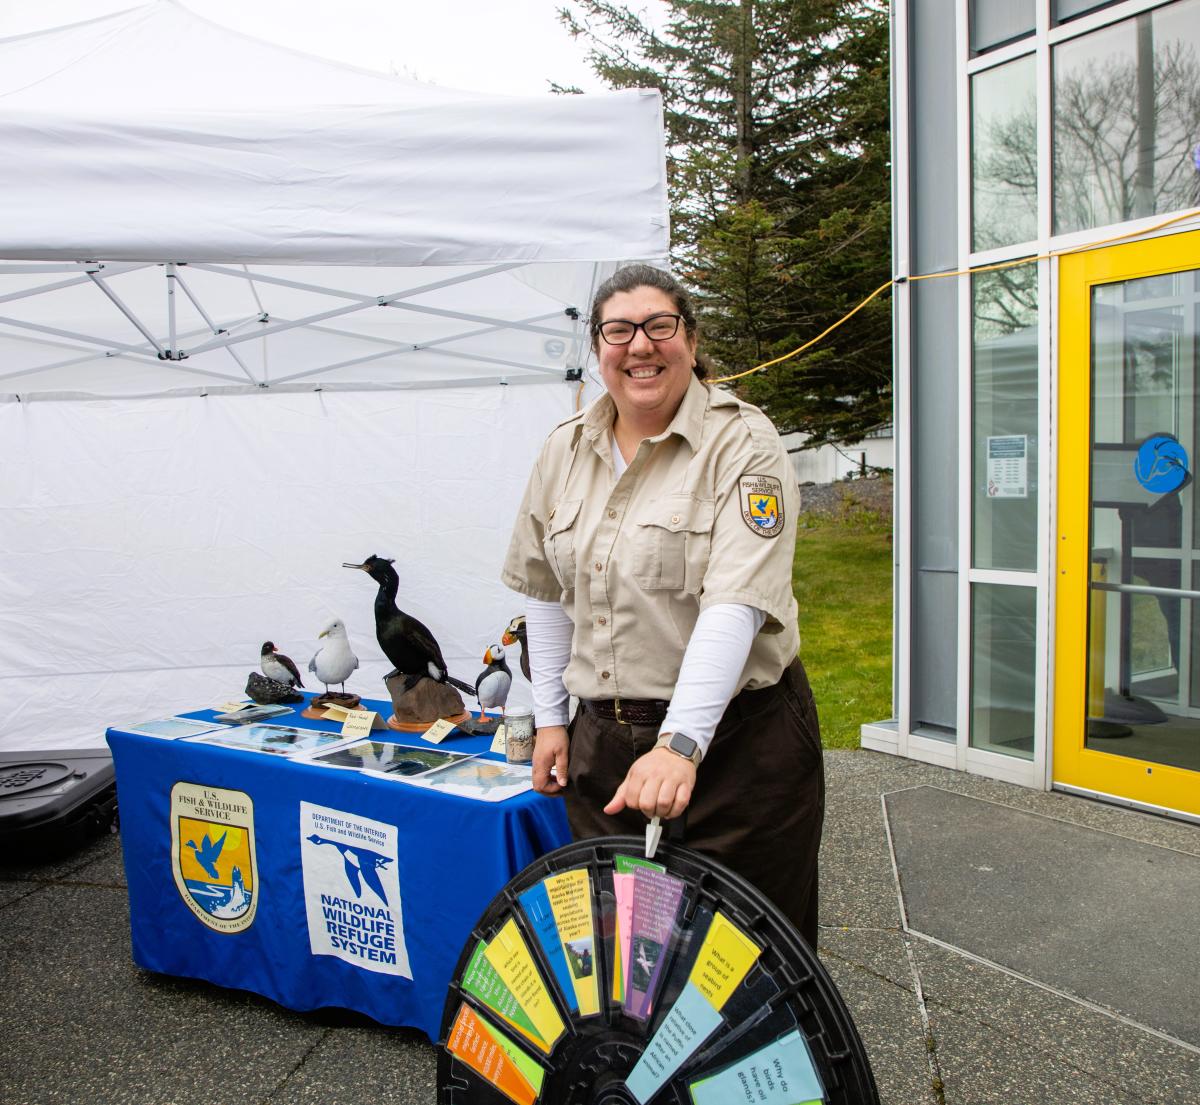 Park ranger with a spinning wheel of prizes